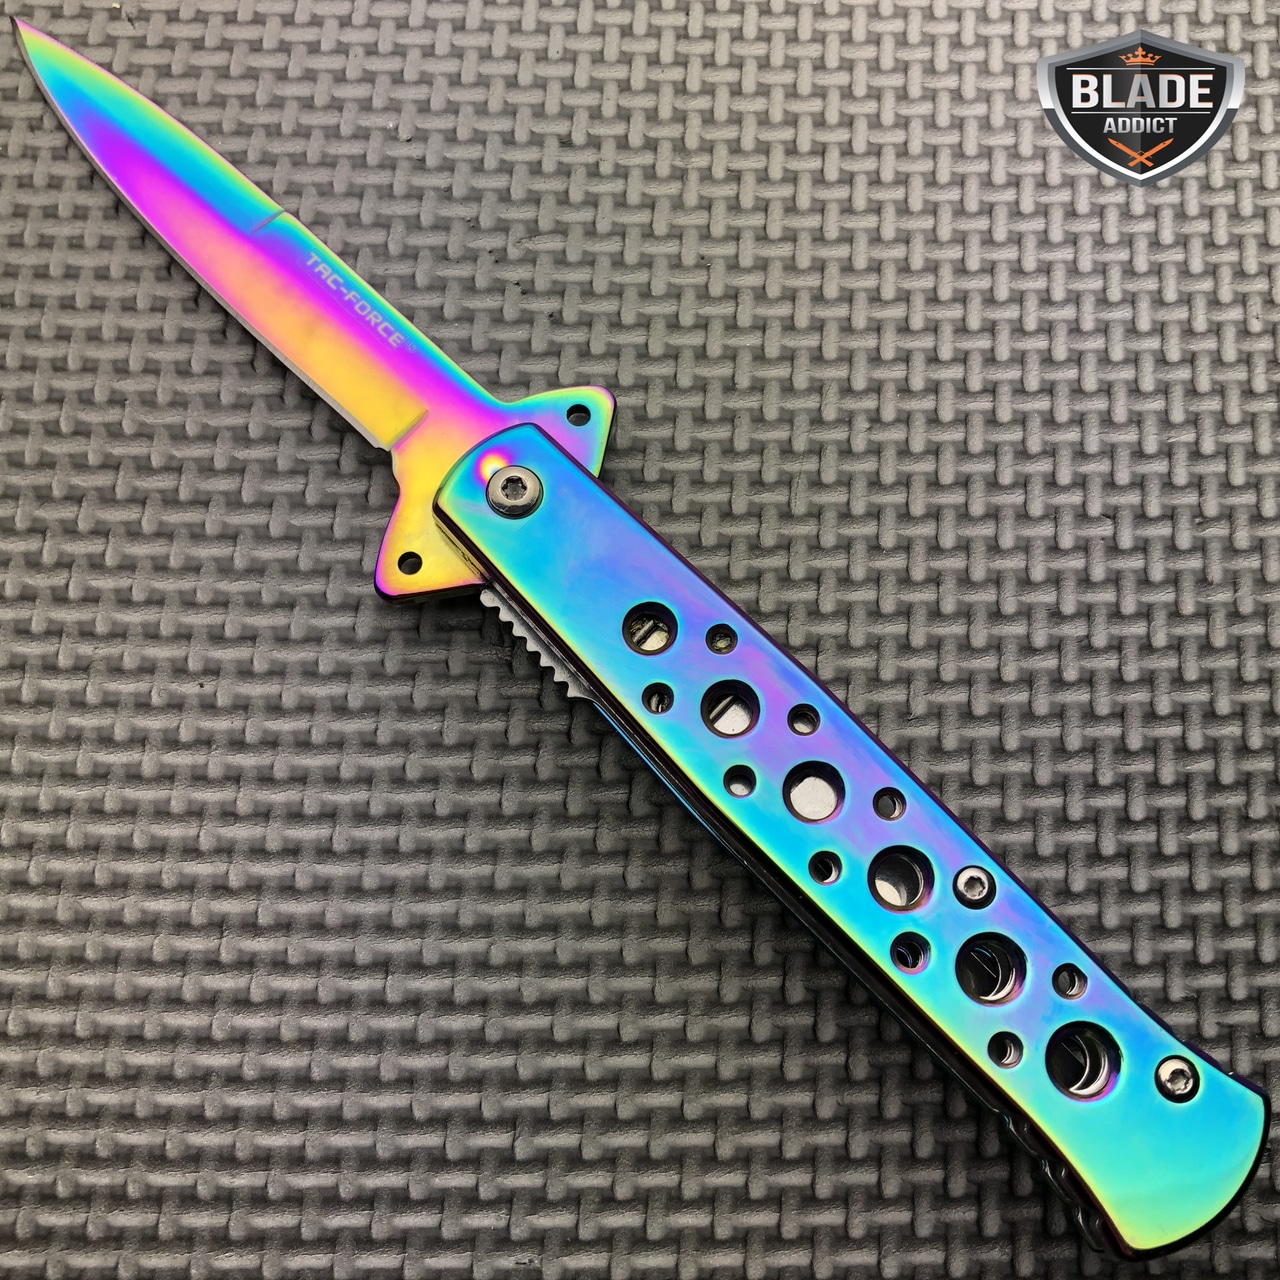 7.25" Tac Force Rainbow Stiletto Spring Assisted Open Folding Pocket Knife